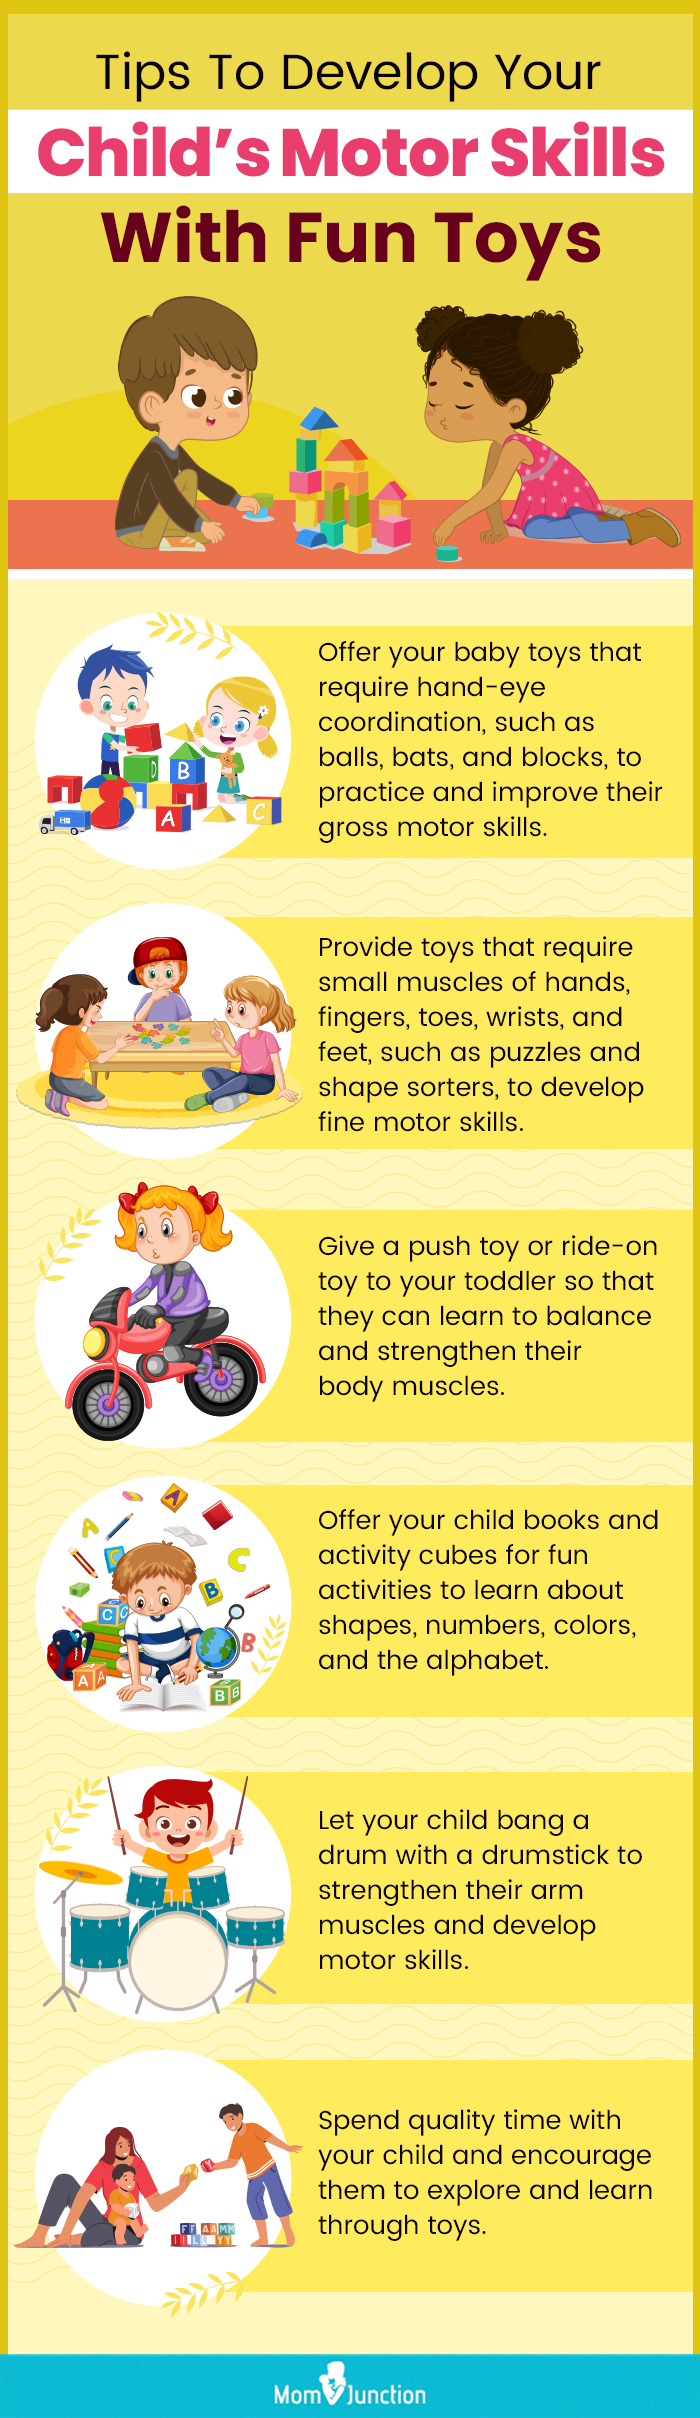 Tips-To-Develop-Your-Child’s-Motor-Skills-With-Fun-Toys(infographic)